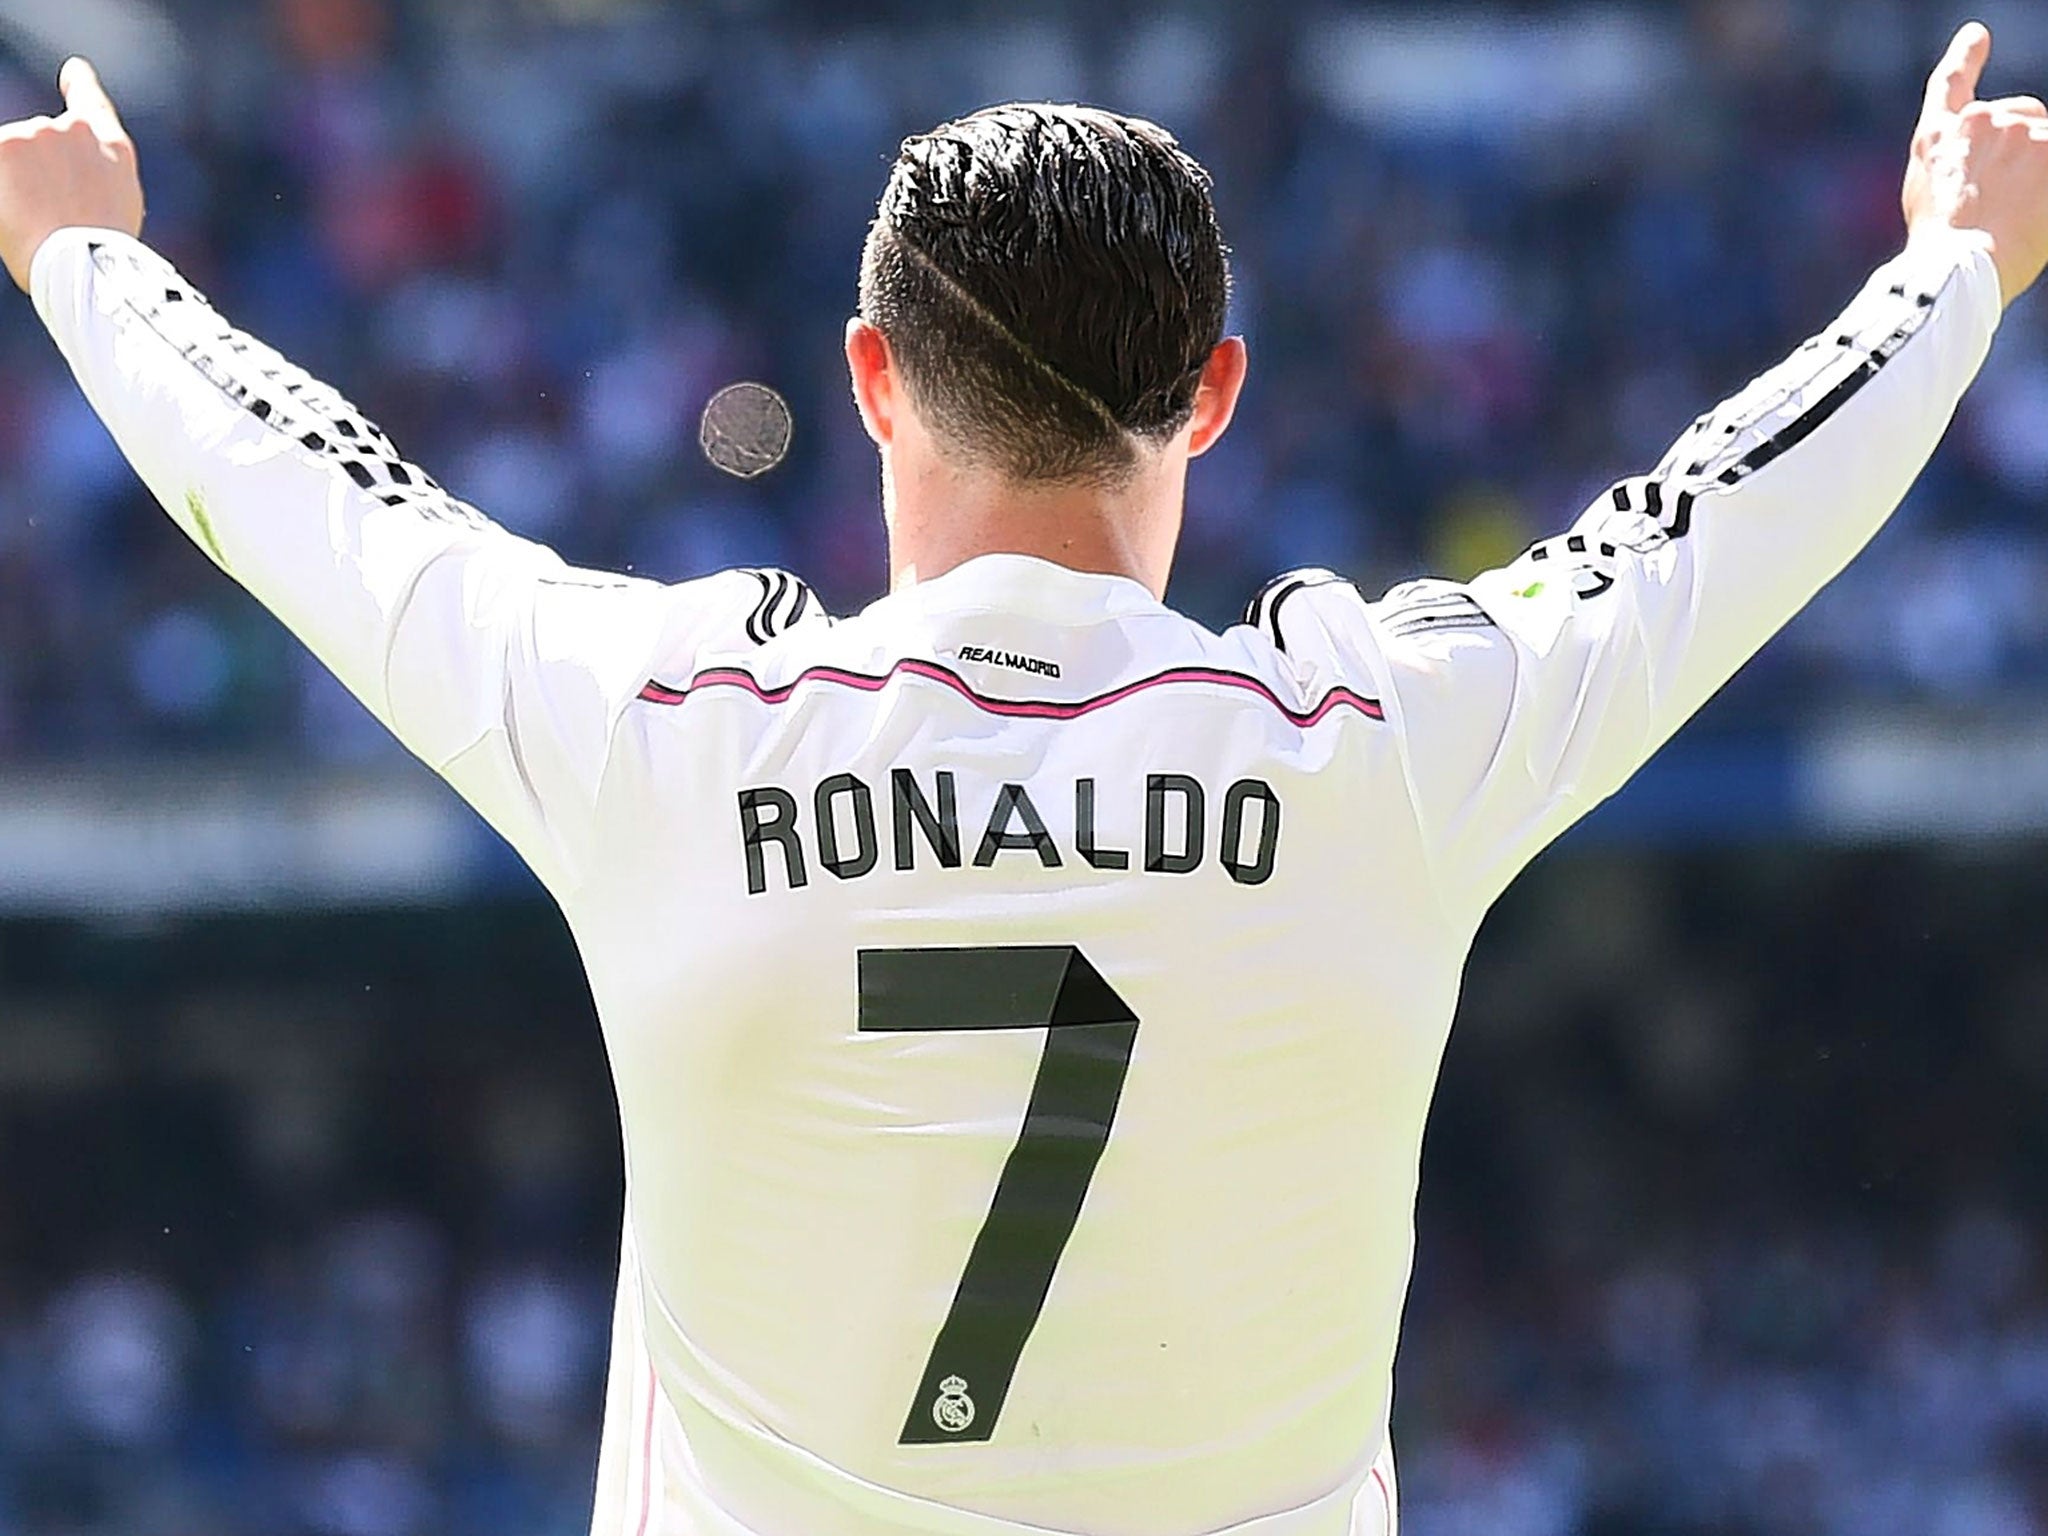 From Ronaldo to Messi, soccer's biggest superstars shine bright